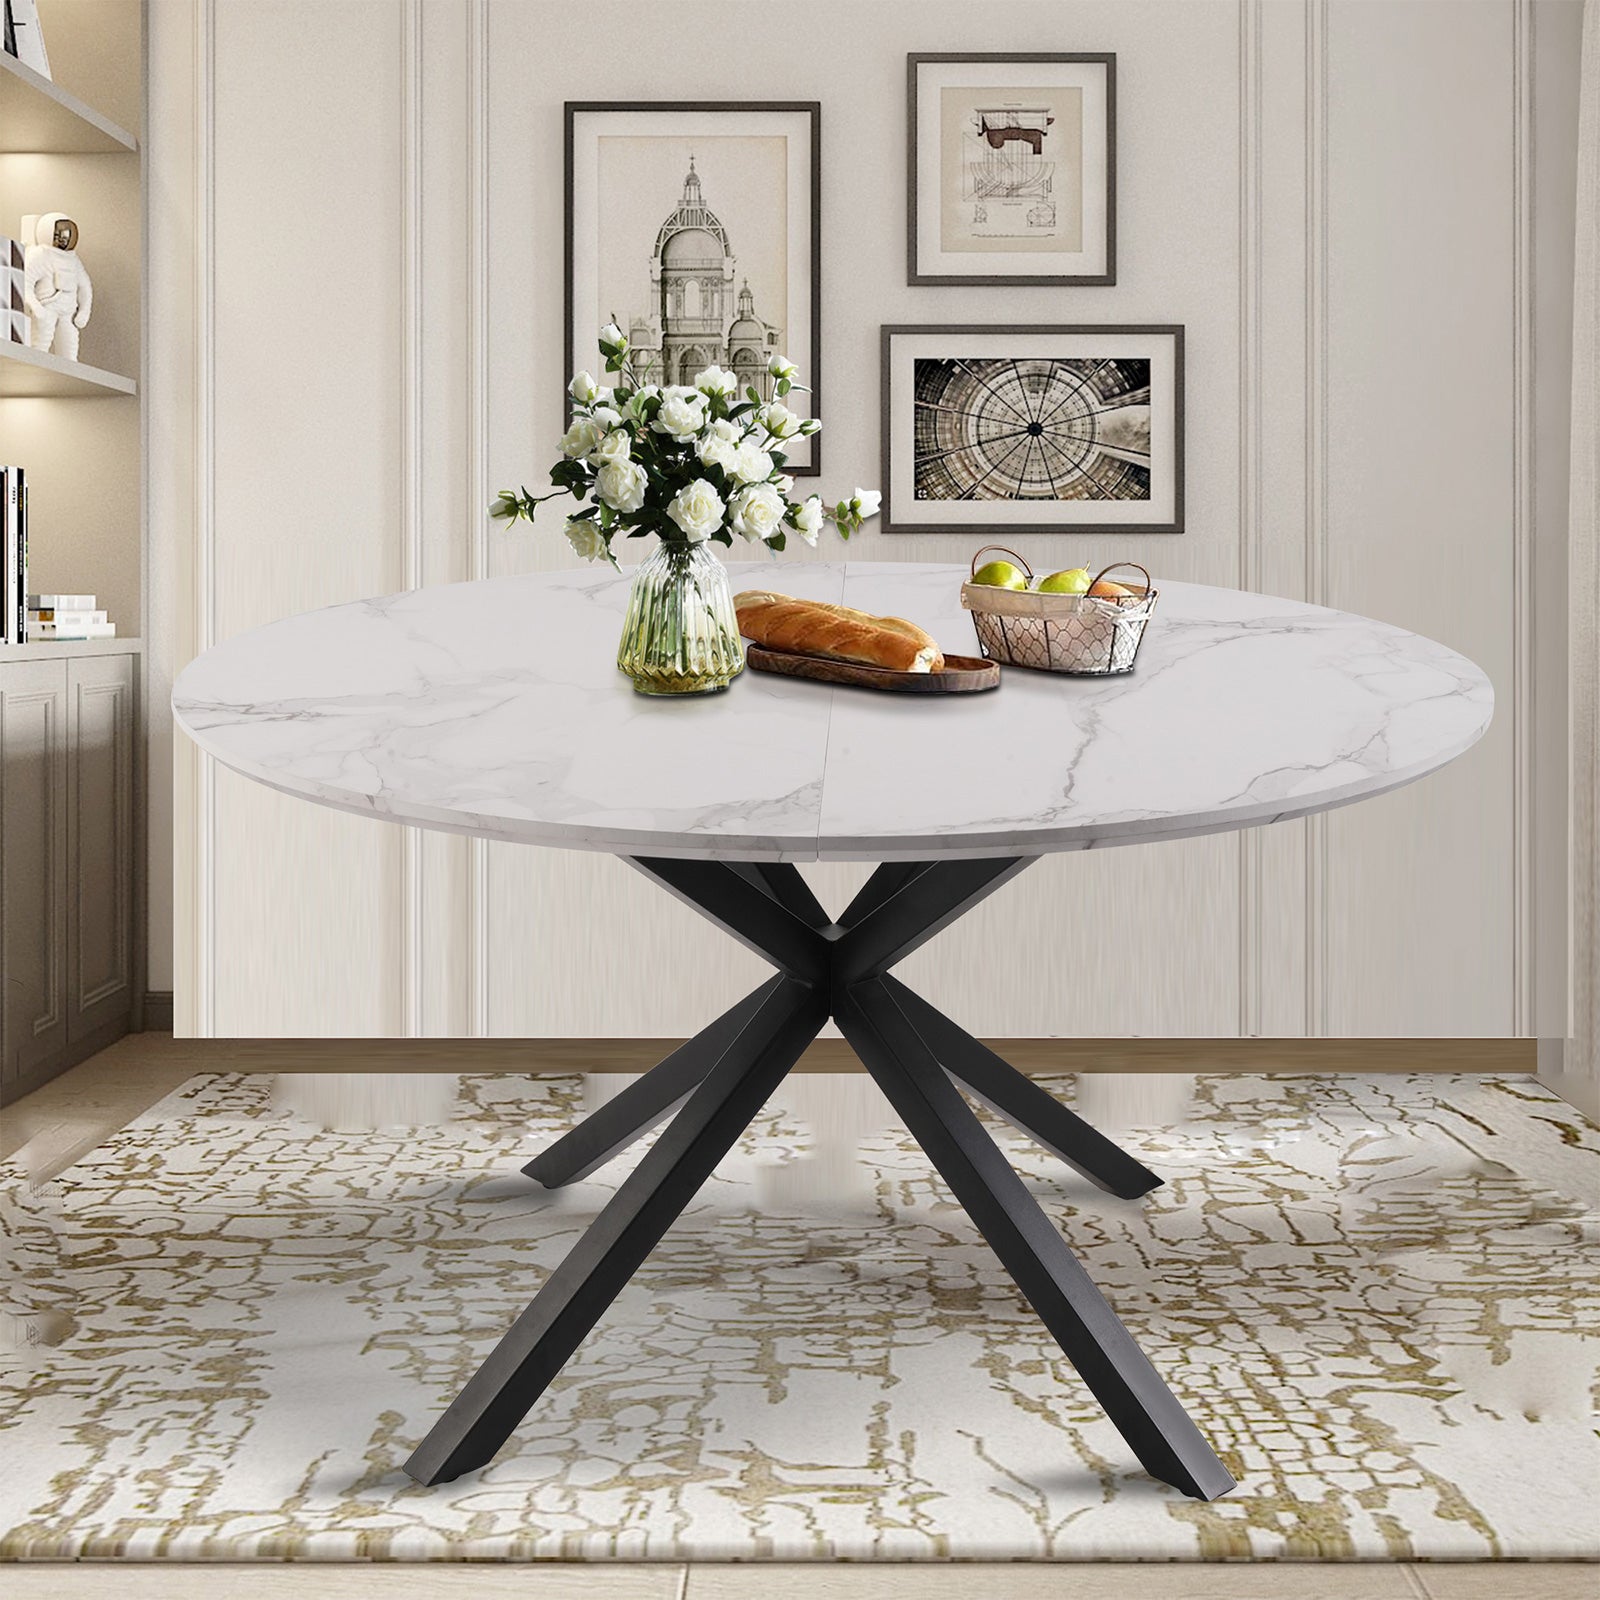 53" Round Mid-Century Modern Wooden Kitchen Dining Table for 4-6 with Solid Metal Leg, Marble Texture